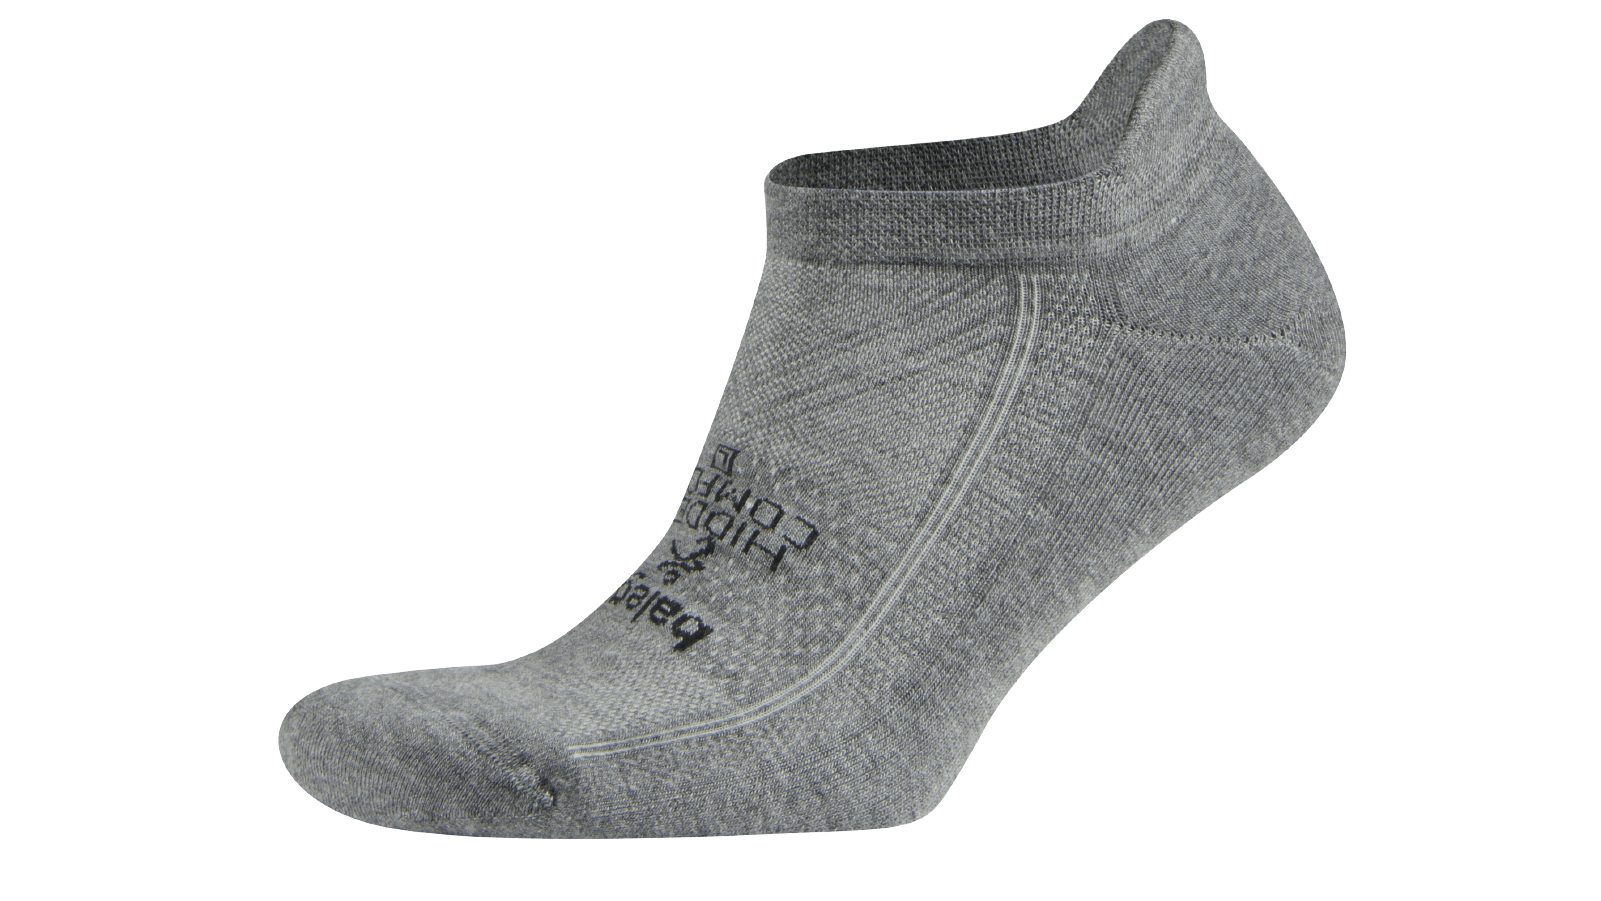 Lateral view of the Balega Hidden Comfort No Show Sock in the color grey.